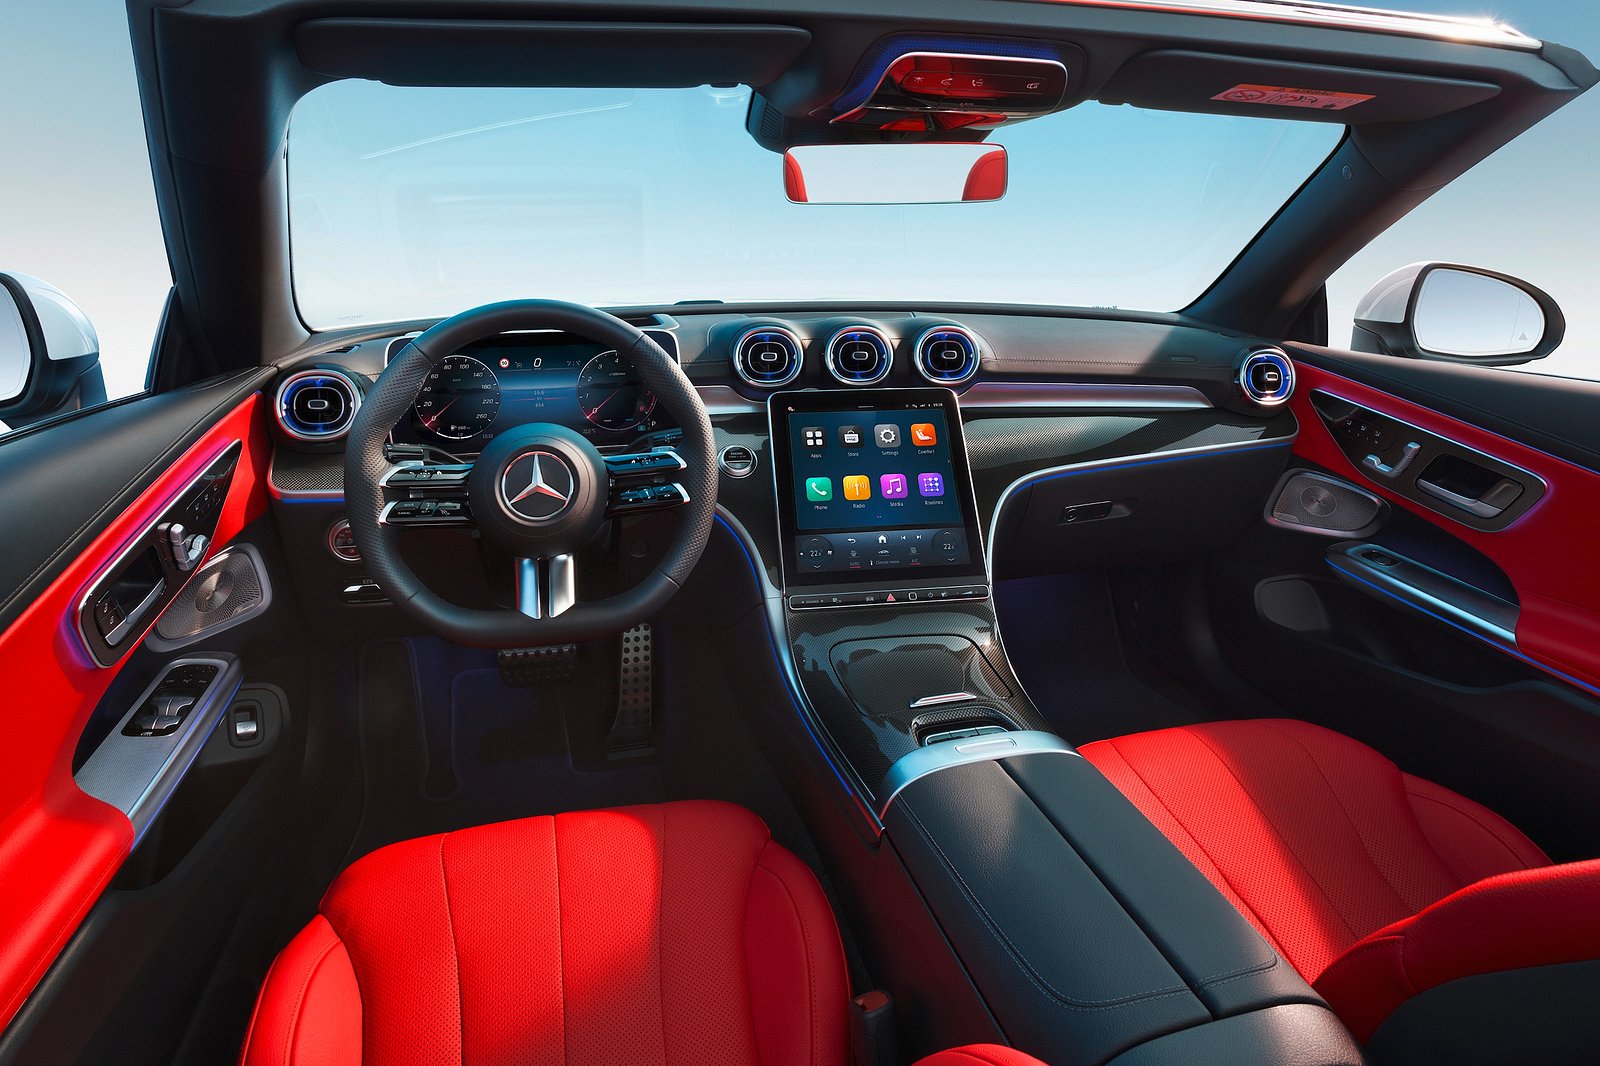 Mercedes-Benz C-Class interior styling, features revealed - Drive